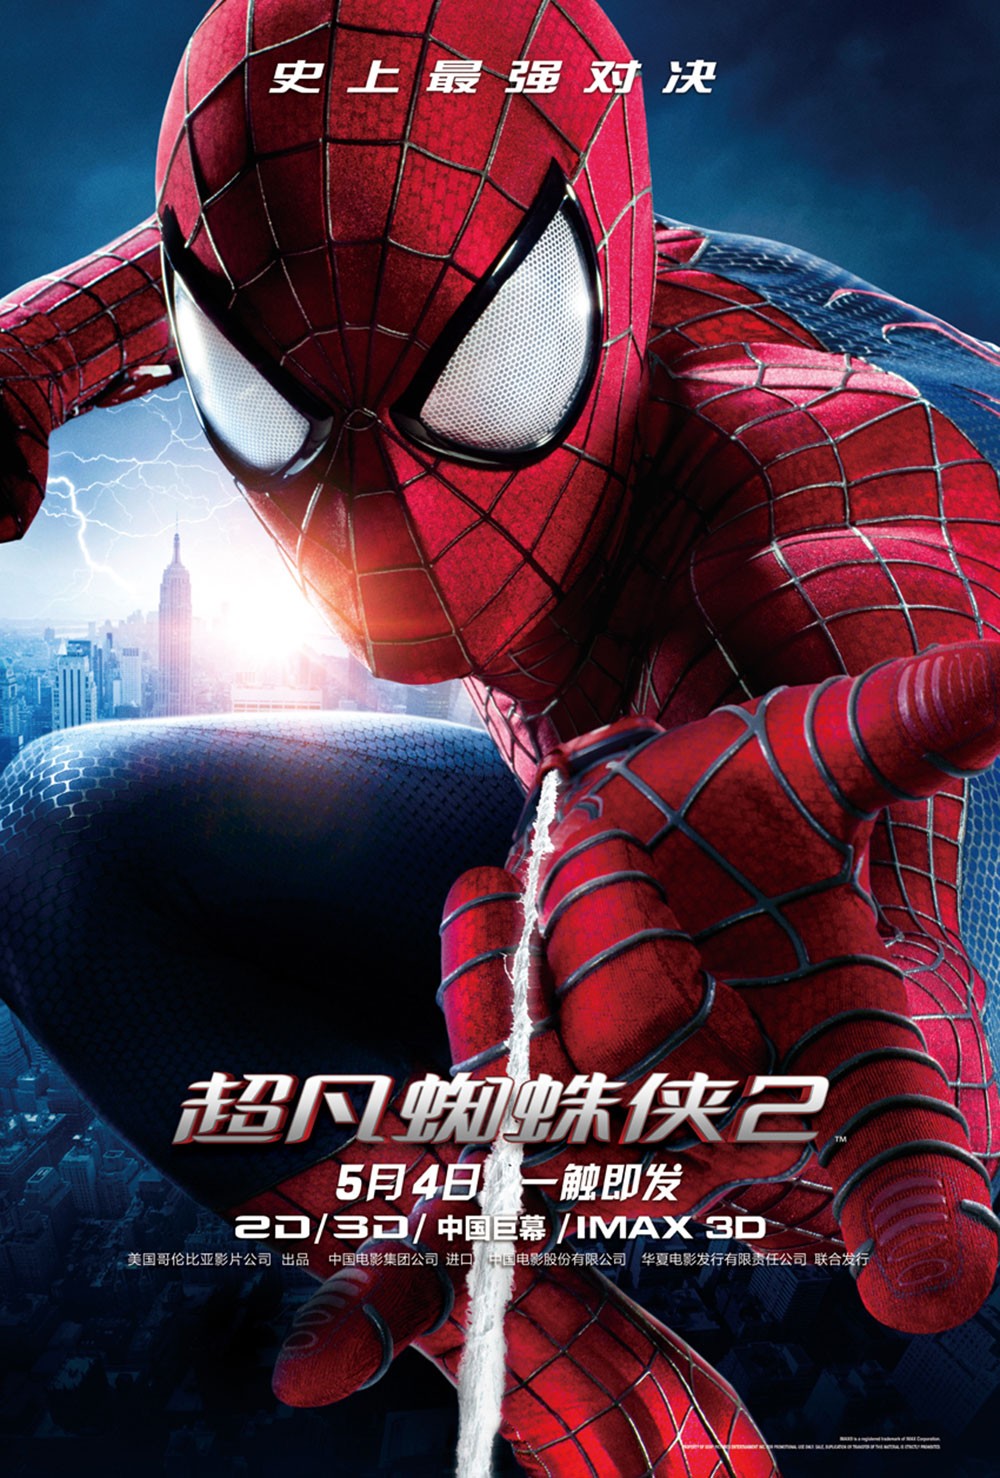 Extra Large Movie Poster Image for The Amazing Spider-Man 2 (#17 of 17)